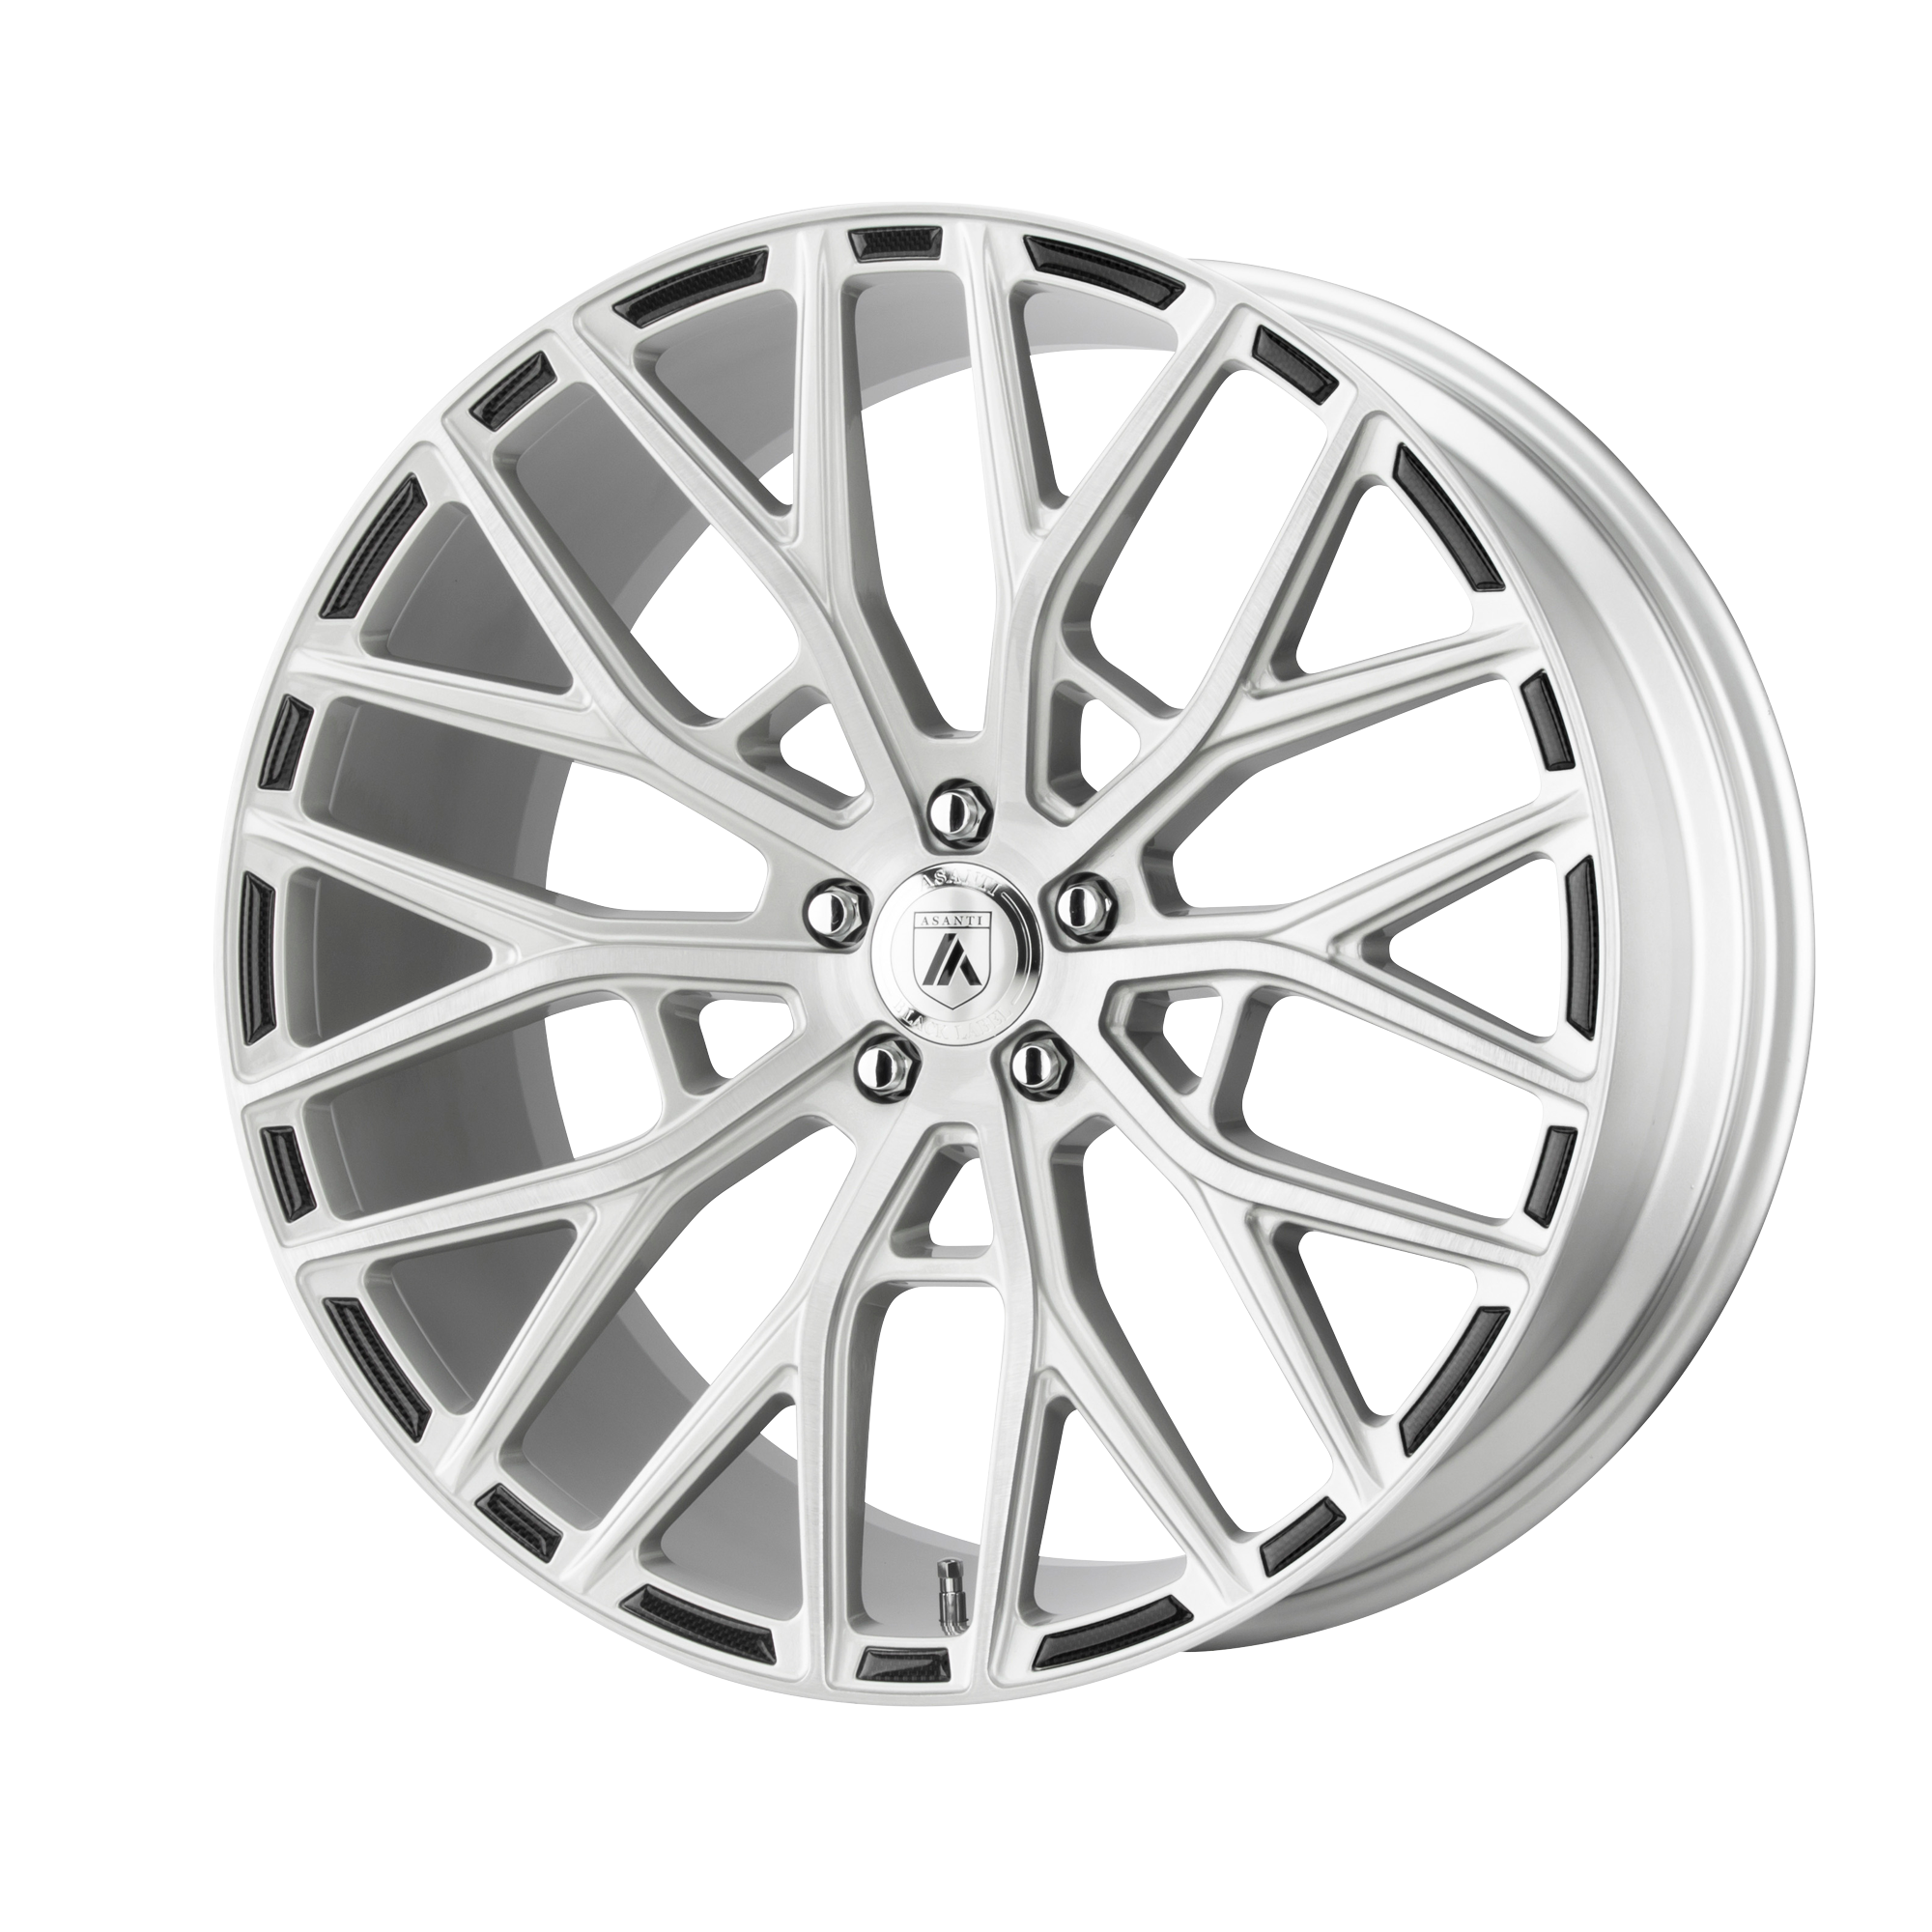 LEO 20x8.5 Blank BRUSHED SILVER (38 mm) - Tires and Engine Performance